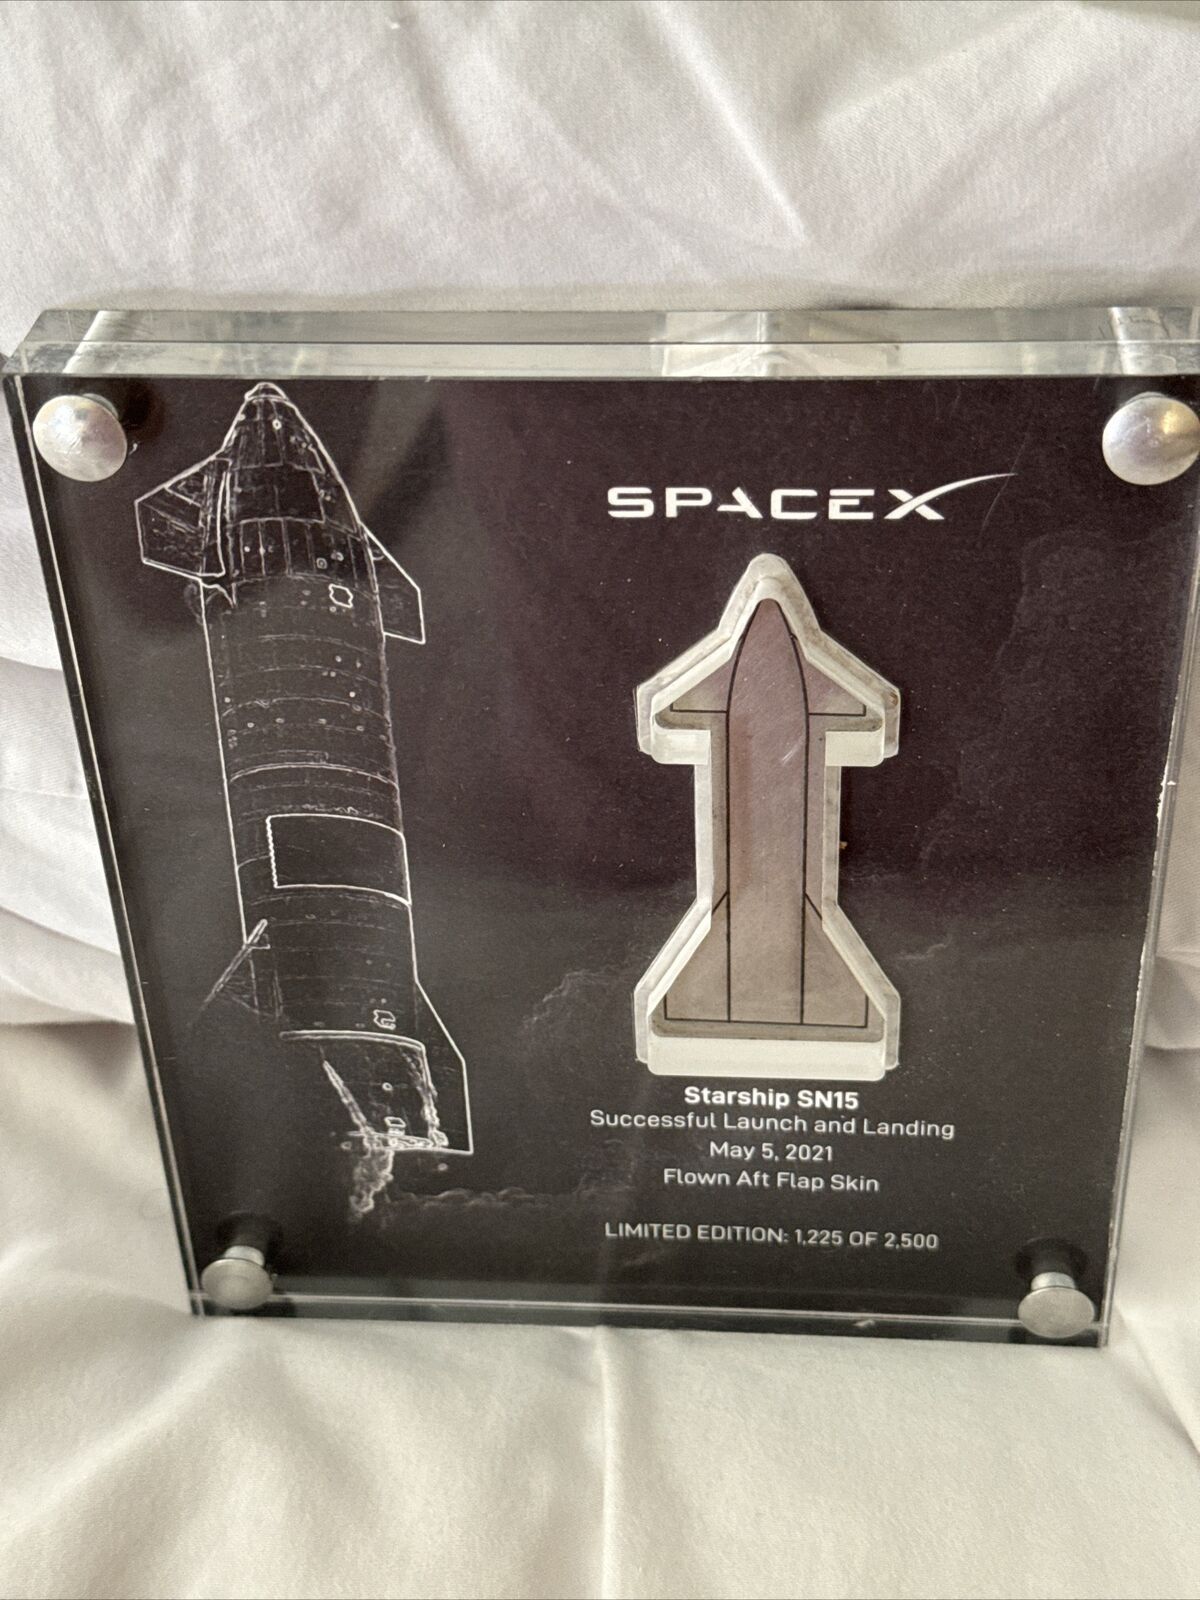 SPACEX - AUTHENTIC SN15 STARSHIP Flown AFT Flap Skin Employee Issued #1225